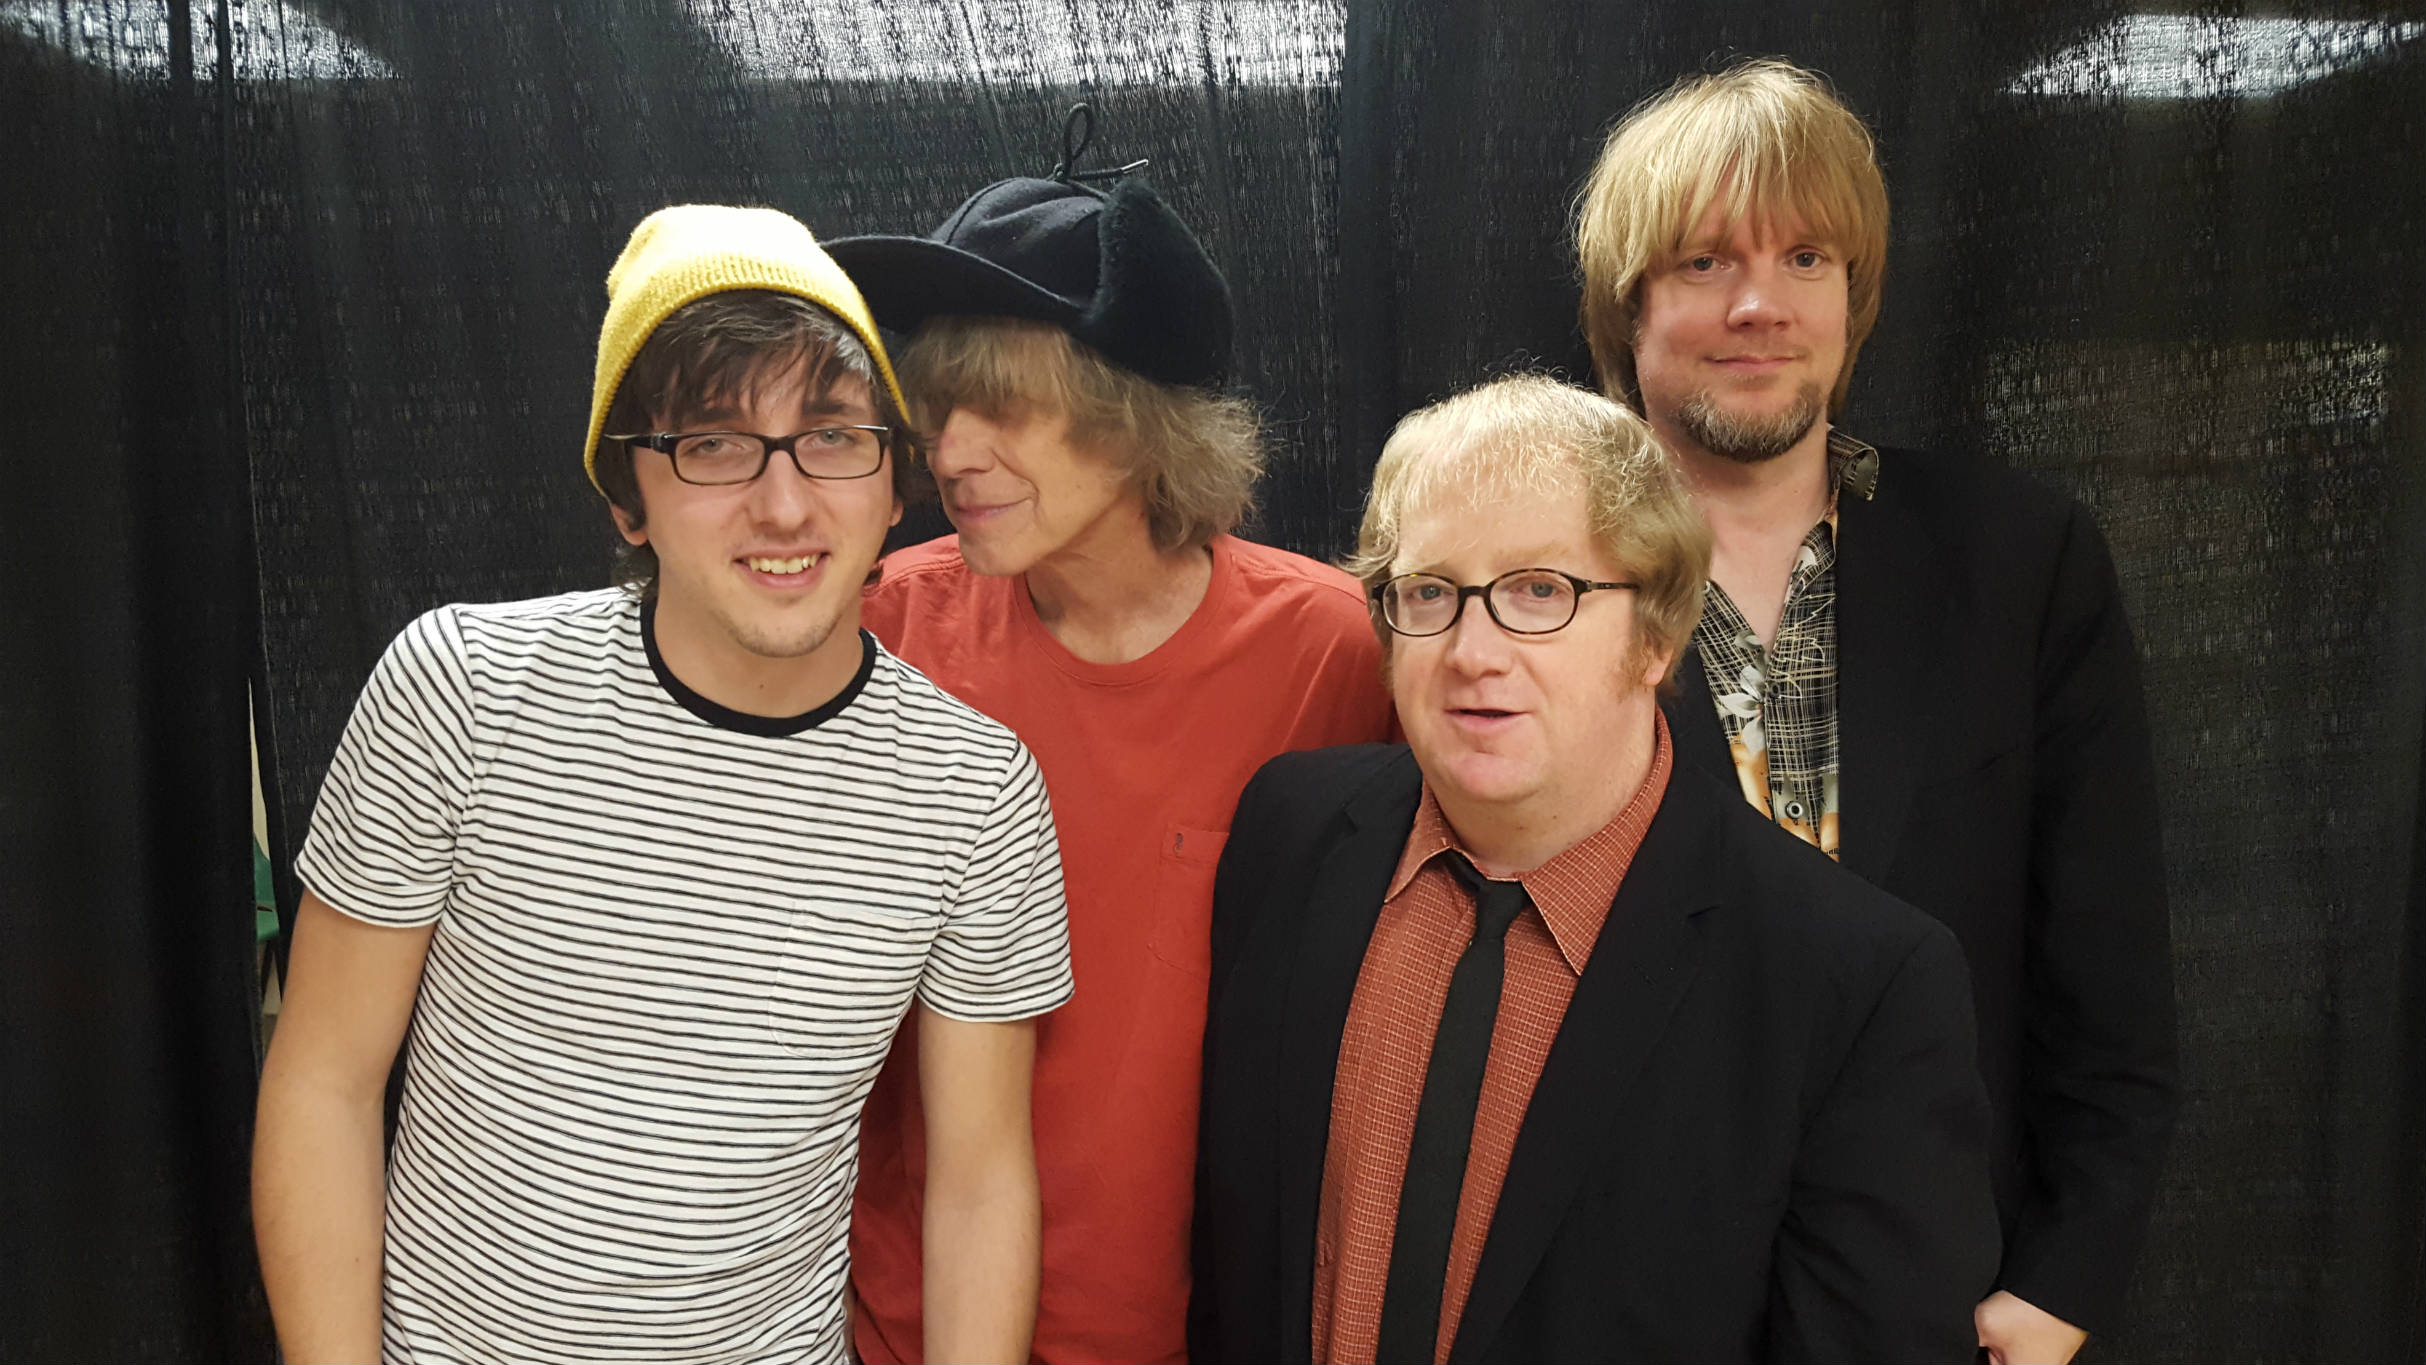 NRBQ in Cleveland promo photo for Valentine's Day 2 for 1  presale offer code